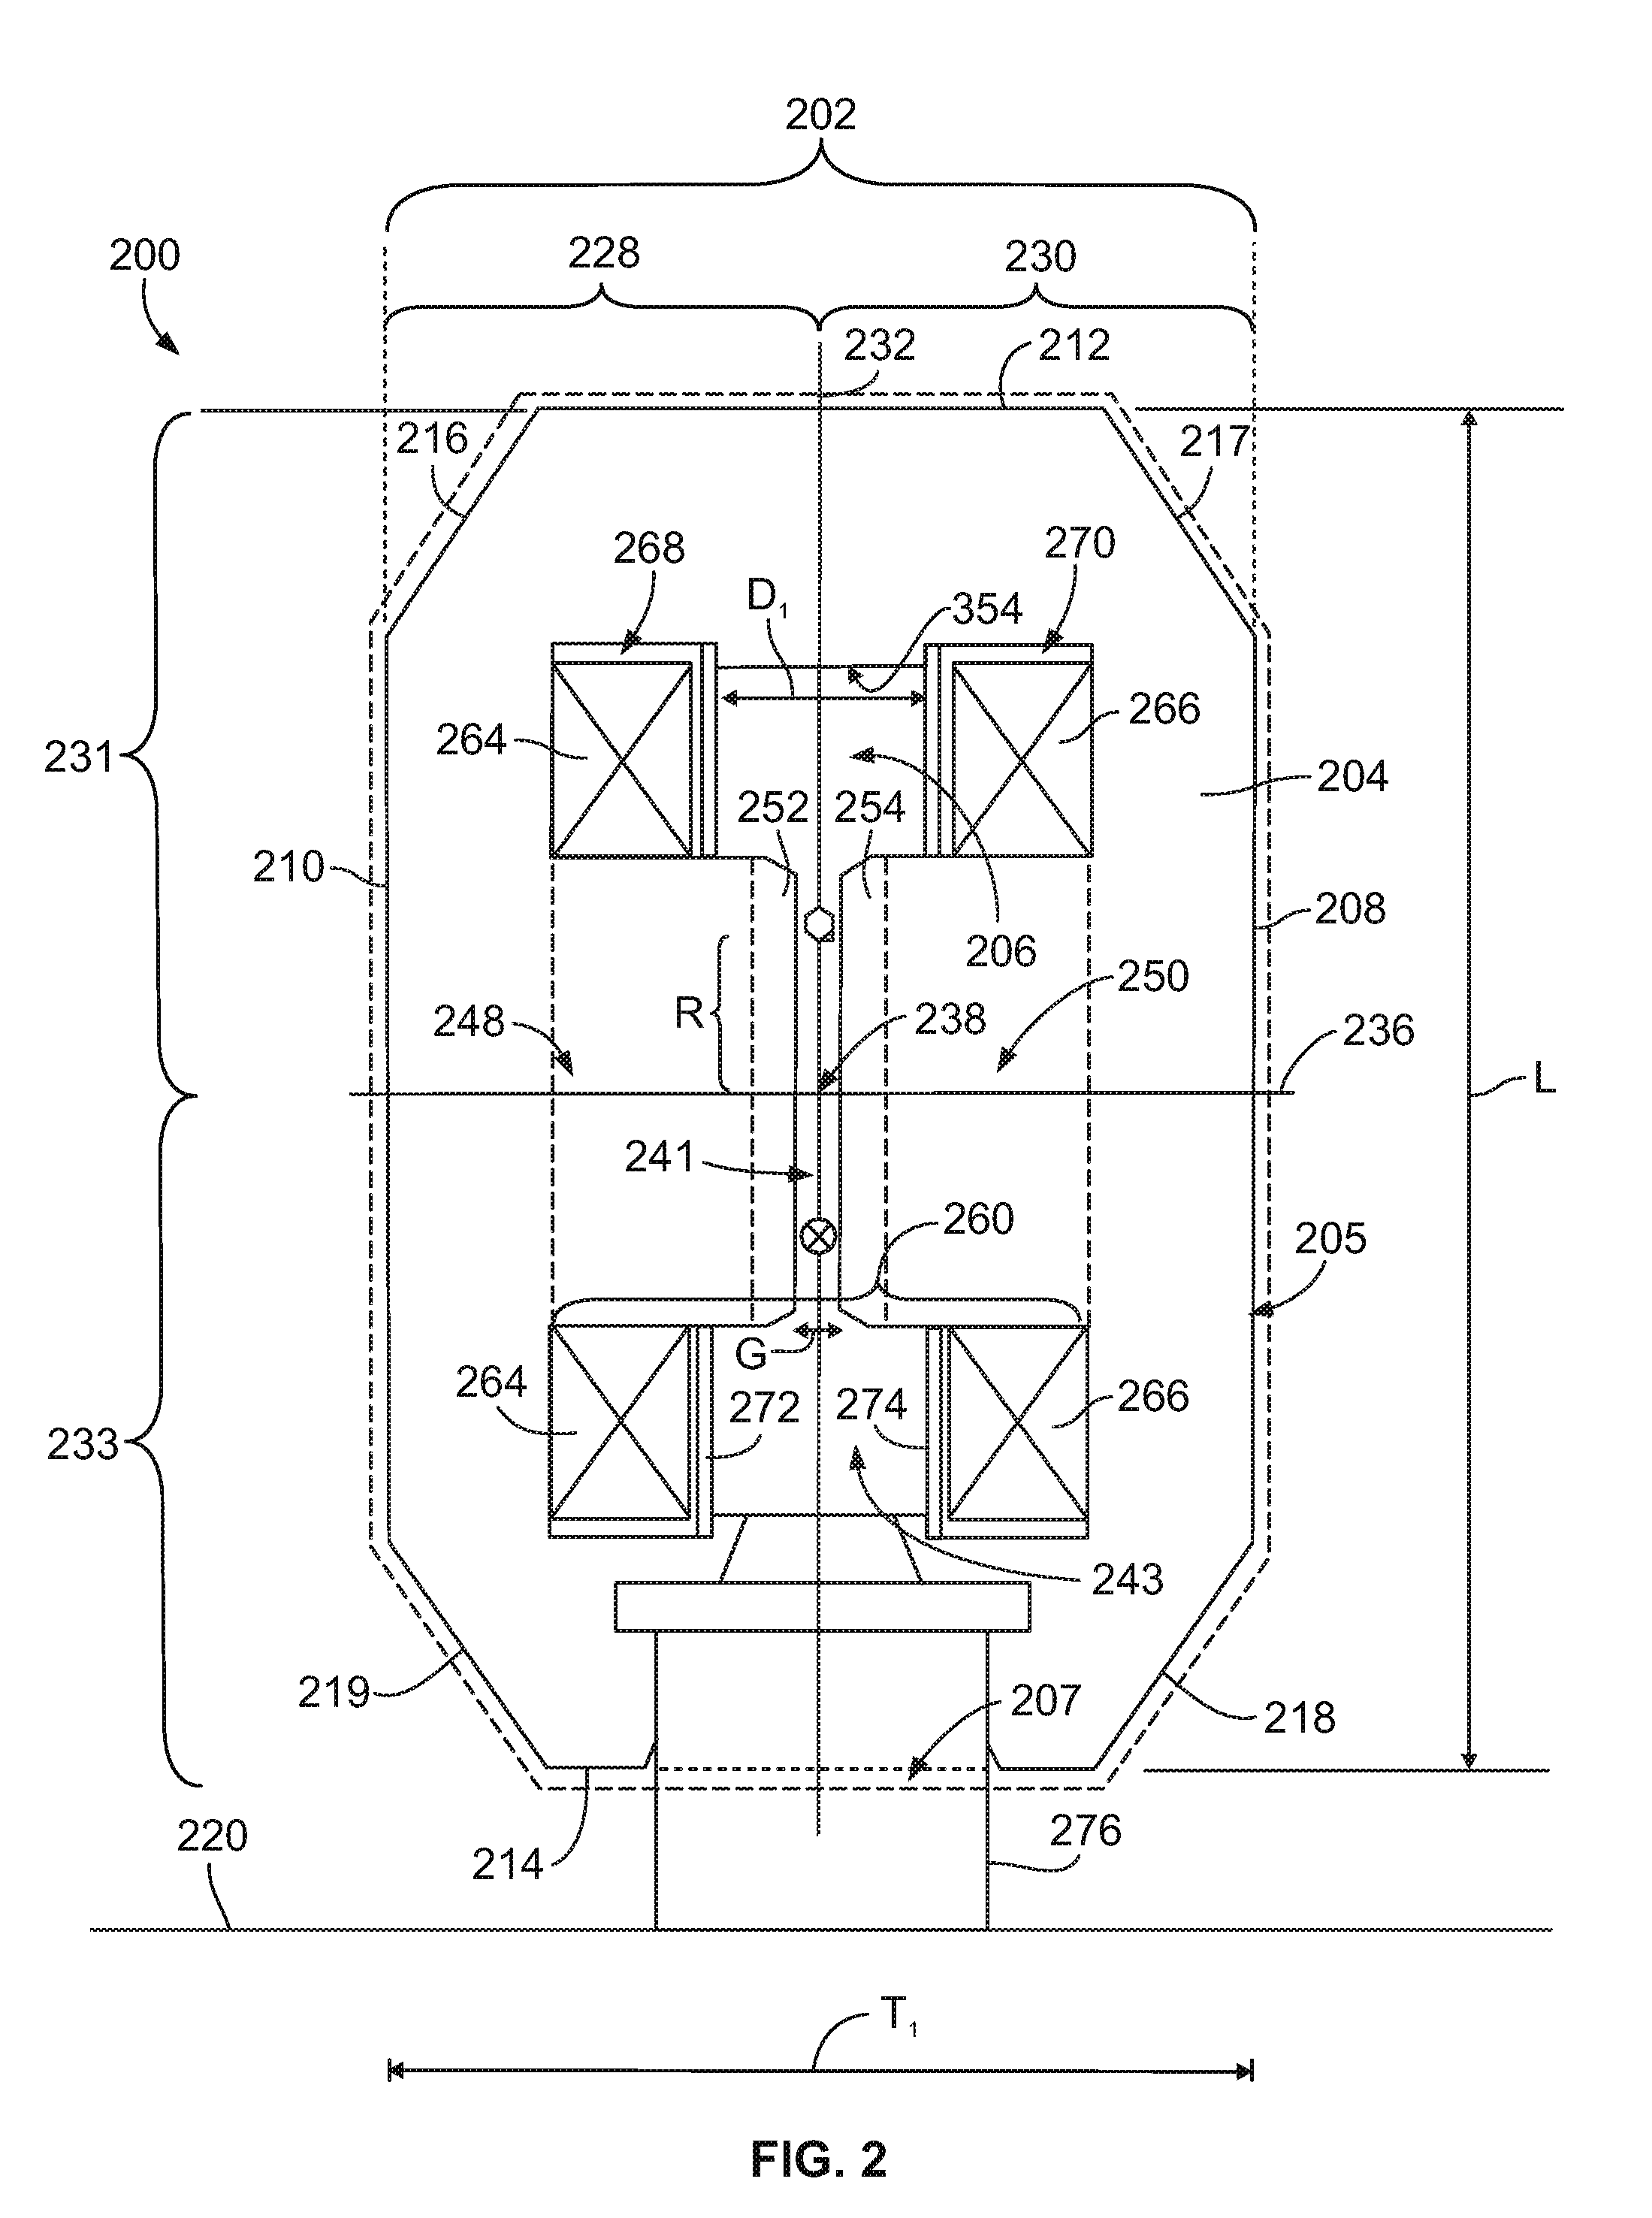 Isotope production system and cyclotron having a magnet yoke with a pump acceptance cavity